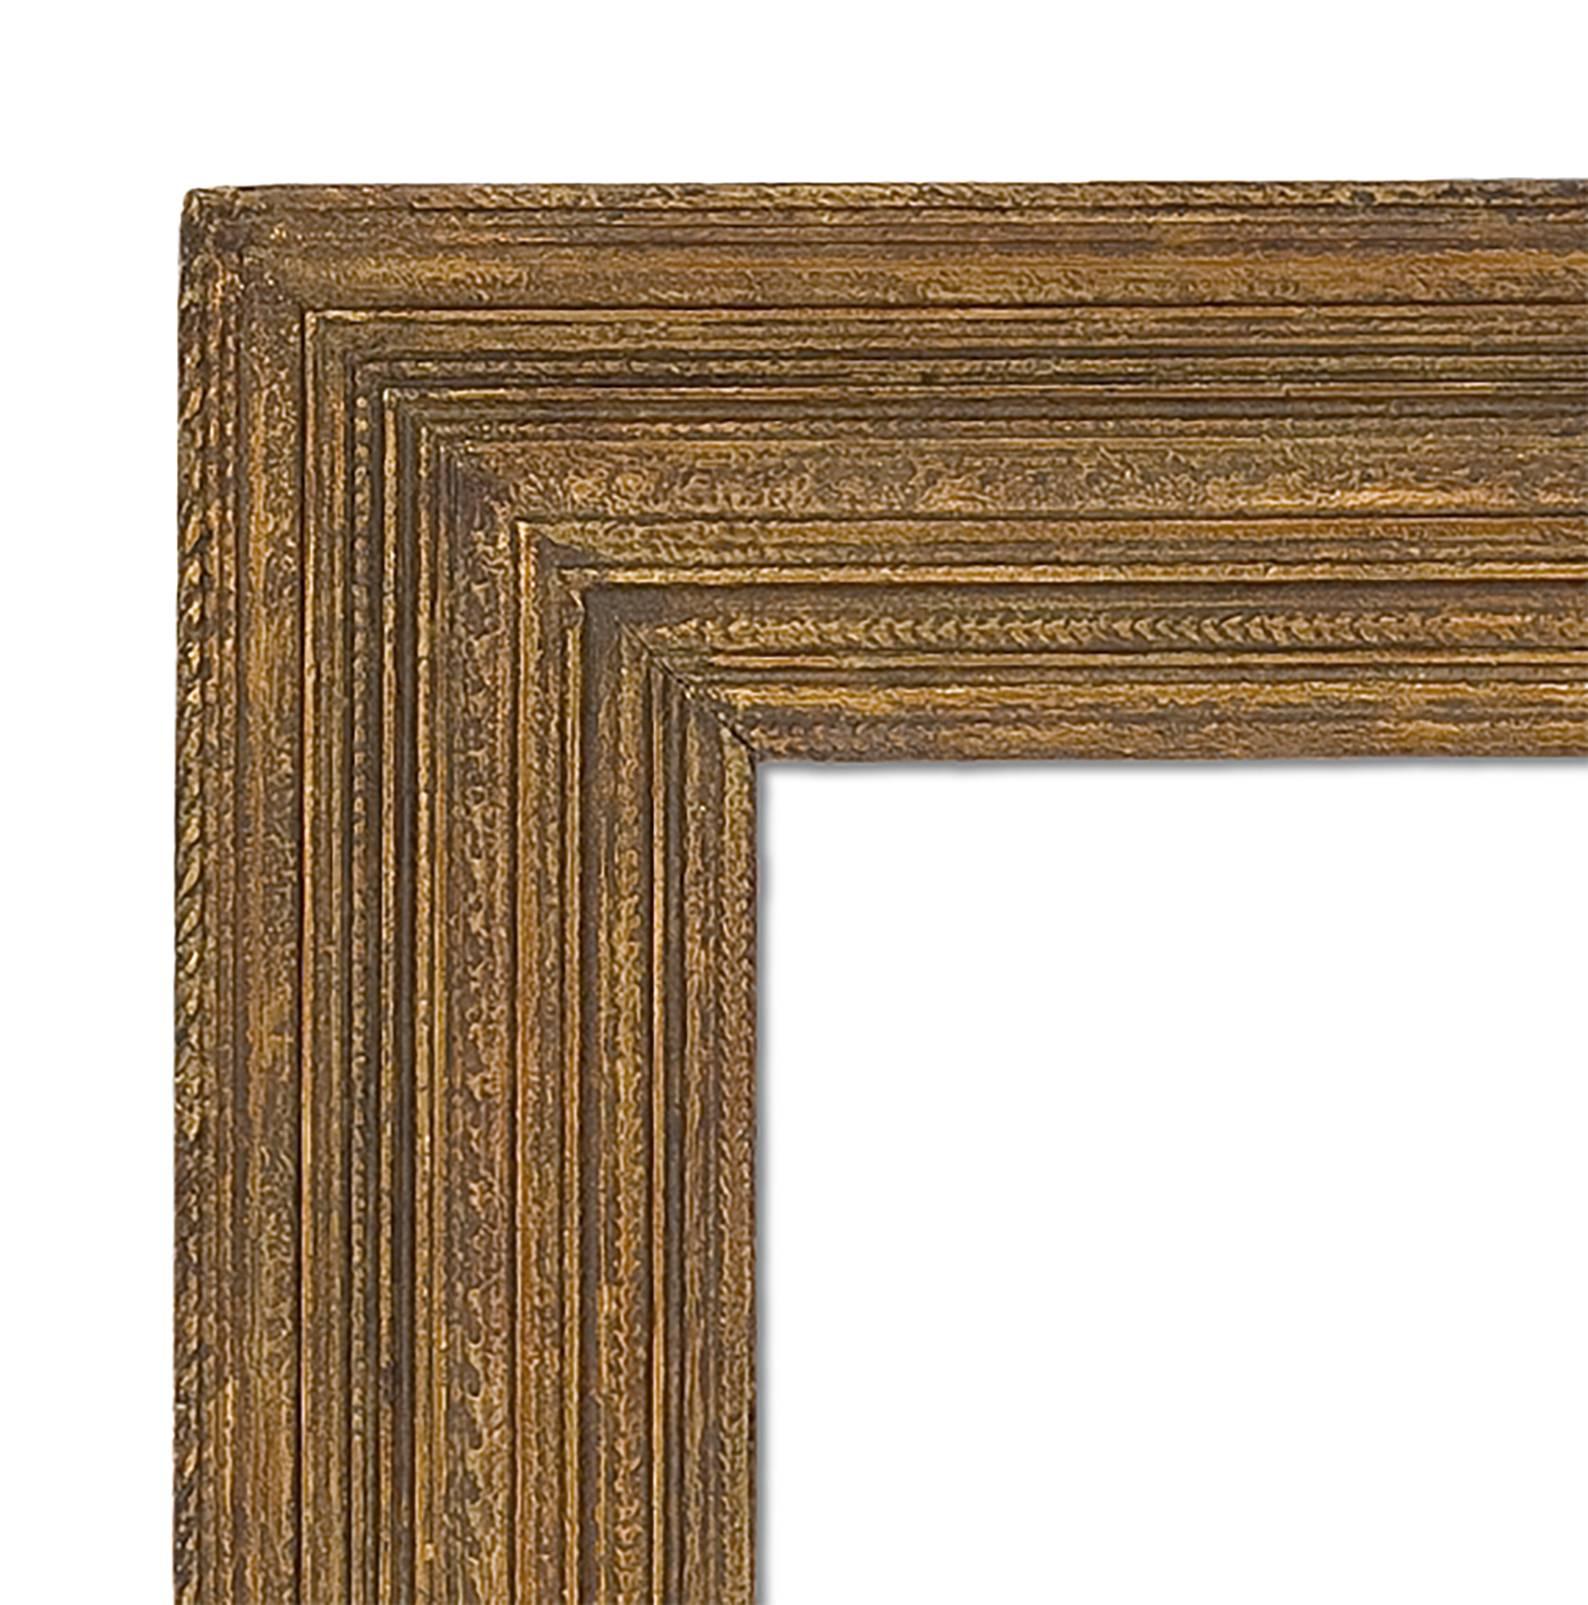 Early 20th century American style frame in the Stanford White design. Cast and gilded, 29